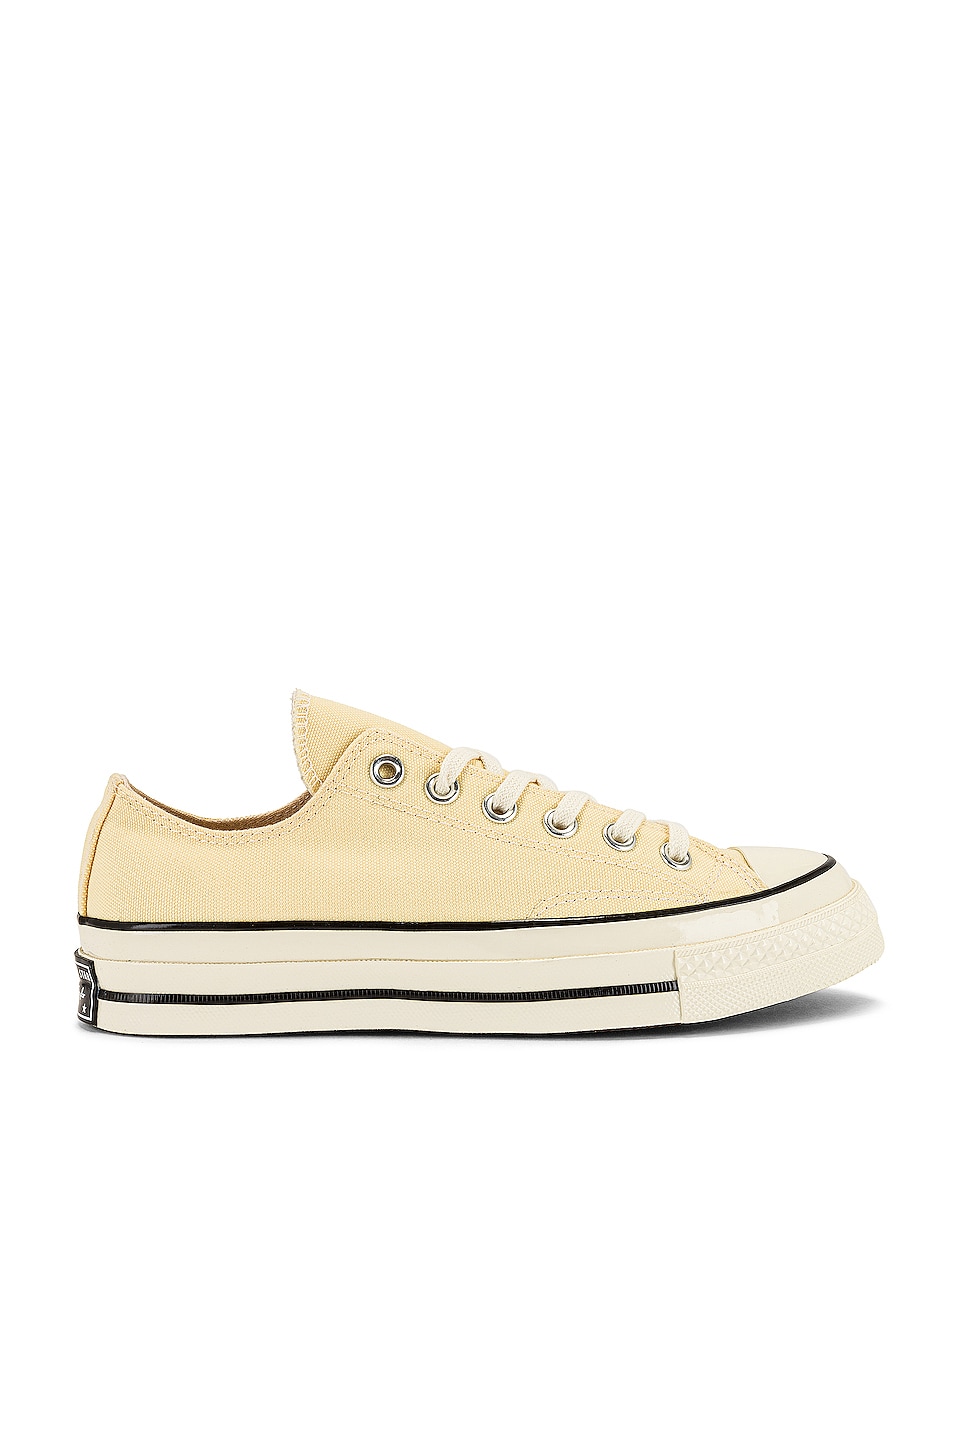 Chuck 70 Seasonal Color Recycled Canvas Sneaker